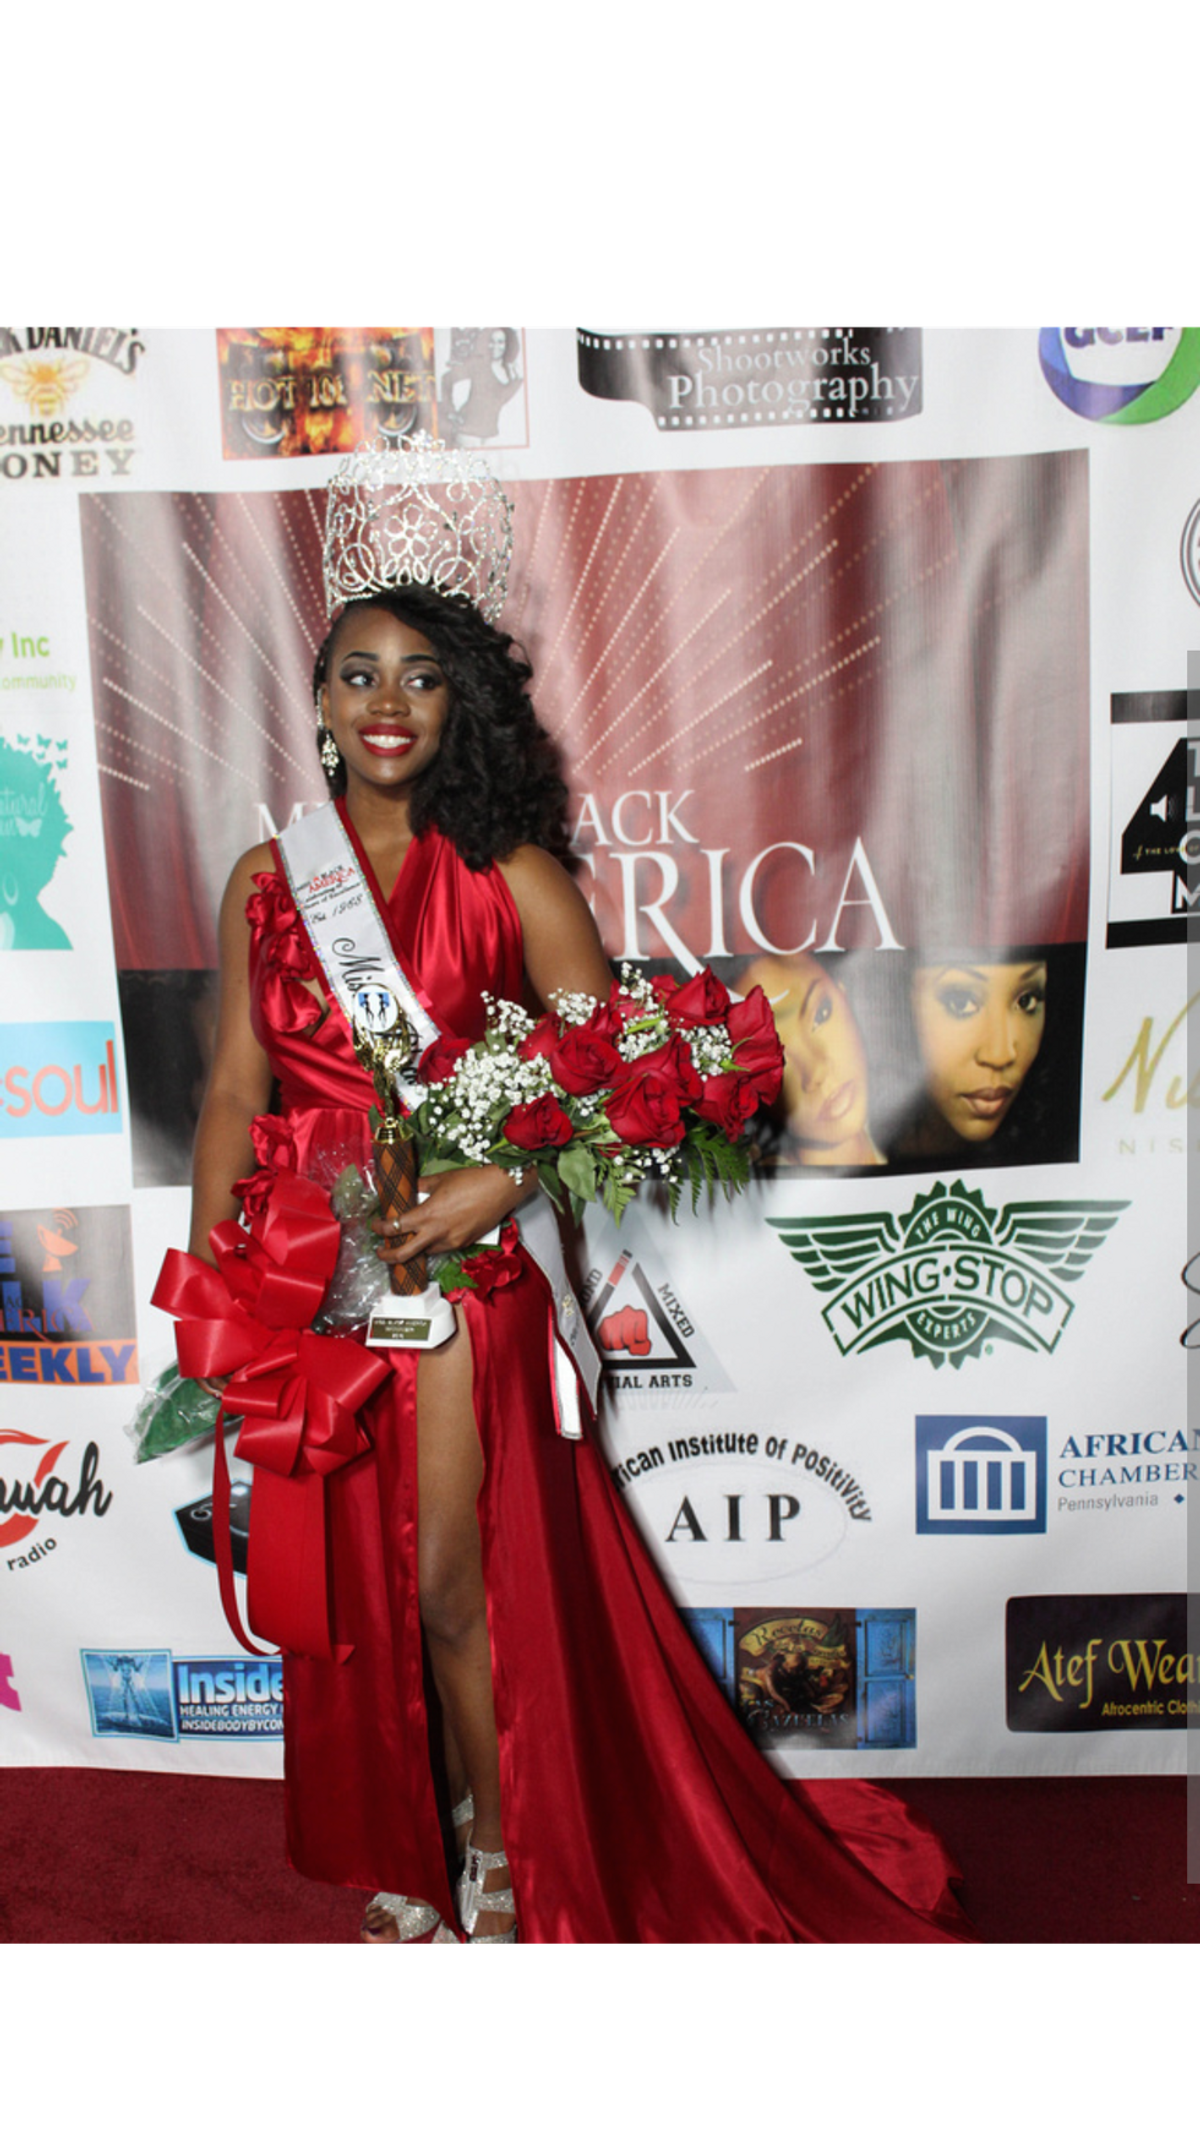 Miss Black America 2016: What Does It Mean To Be a Black Woman?